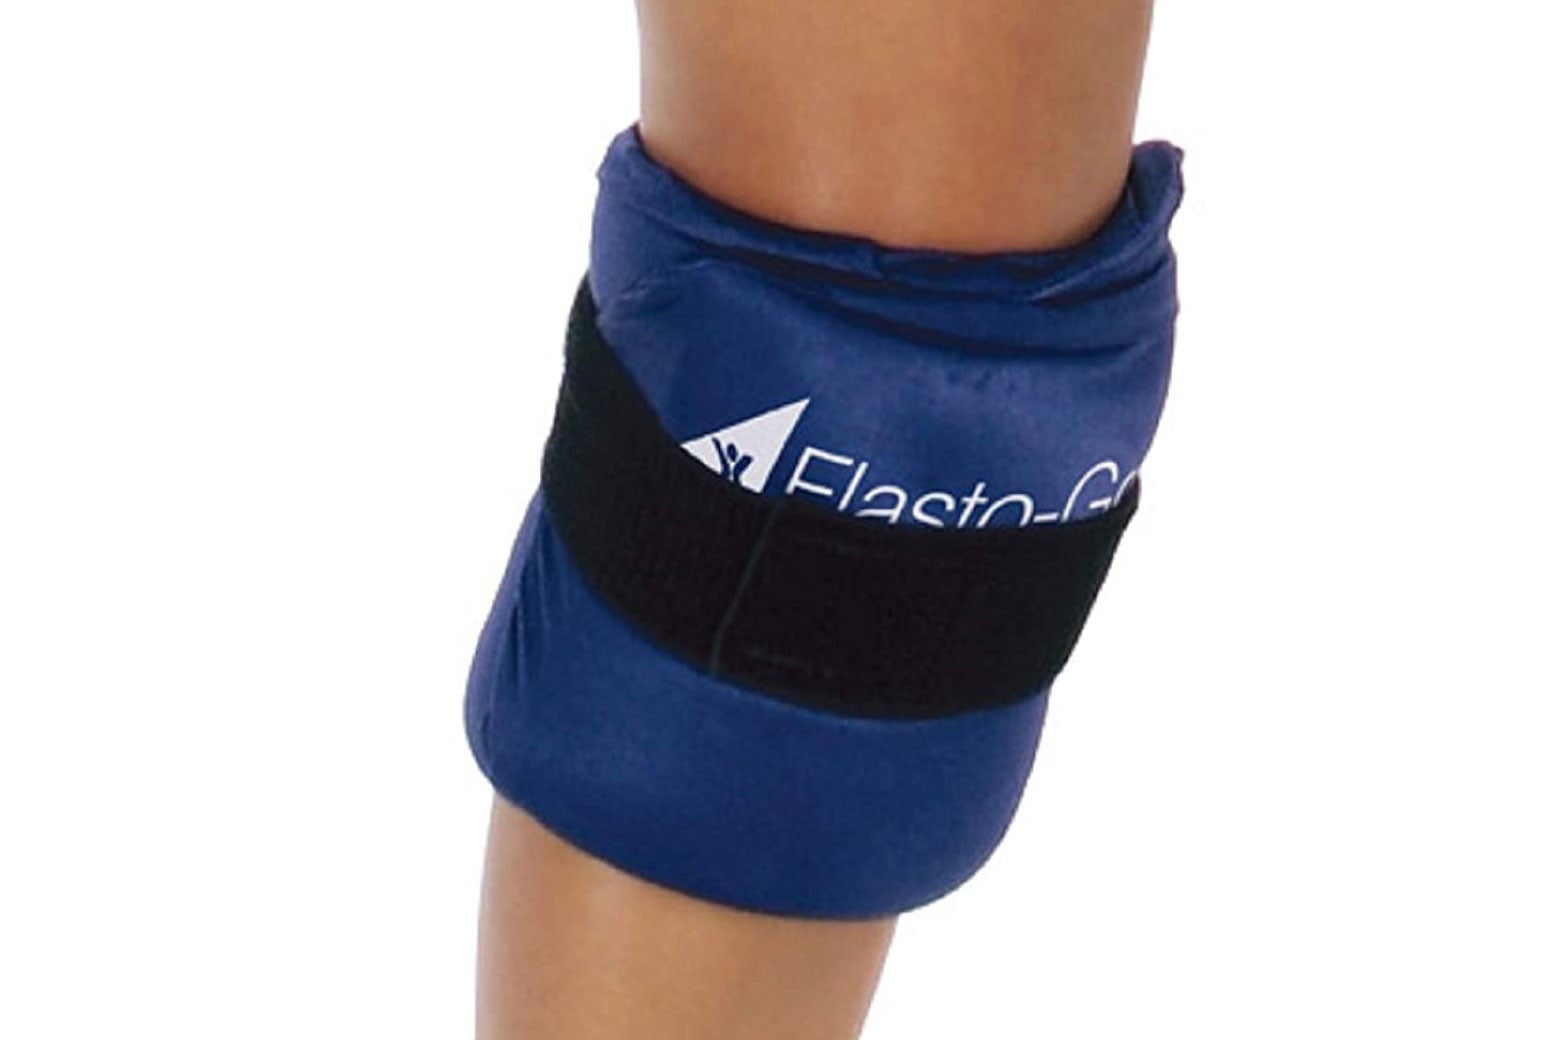 Hot/cold therapy wrap around a leg